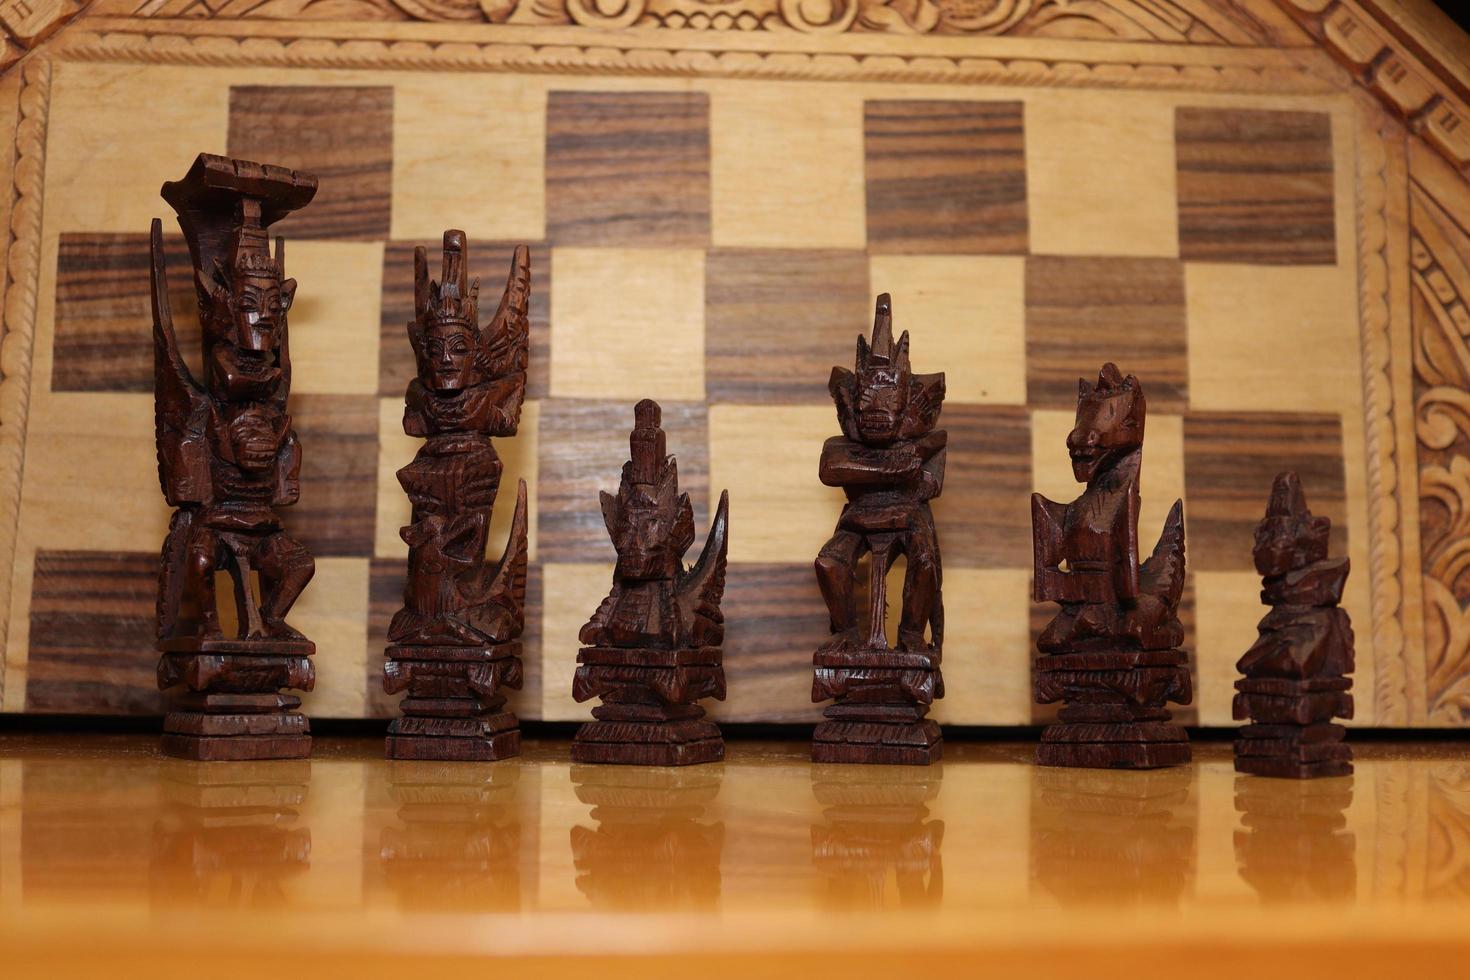 Mayan chess pieces photographed on a background showing a chess board photo